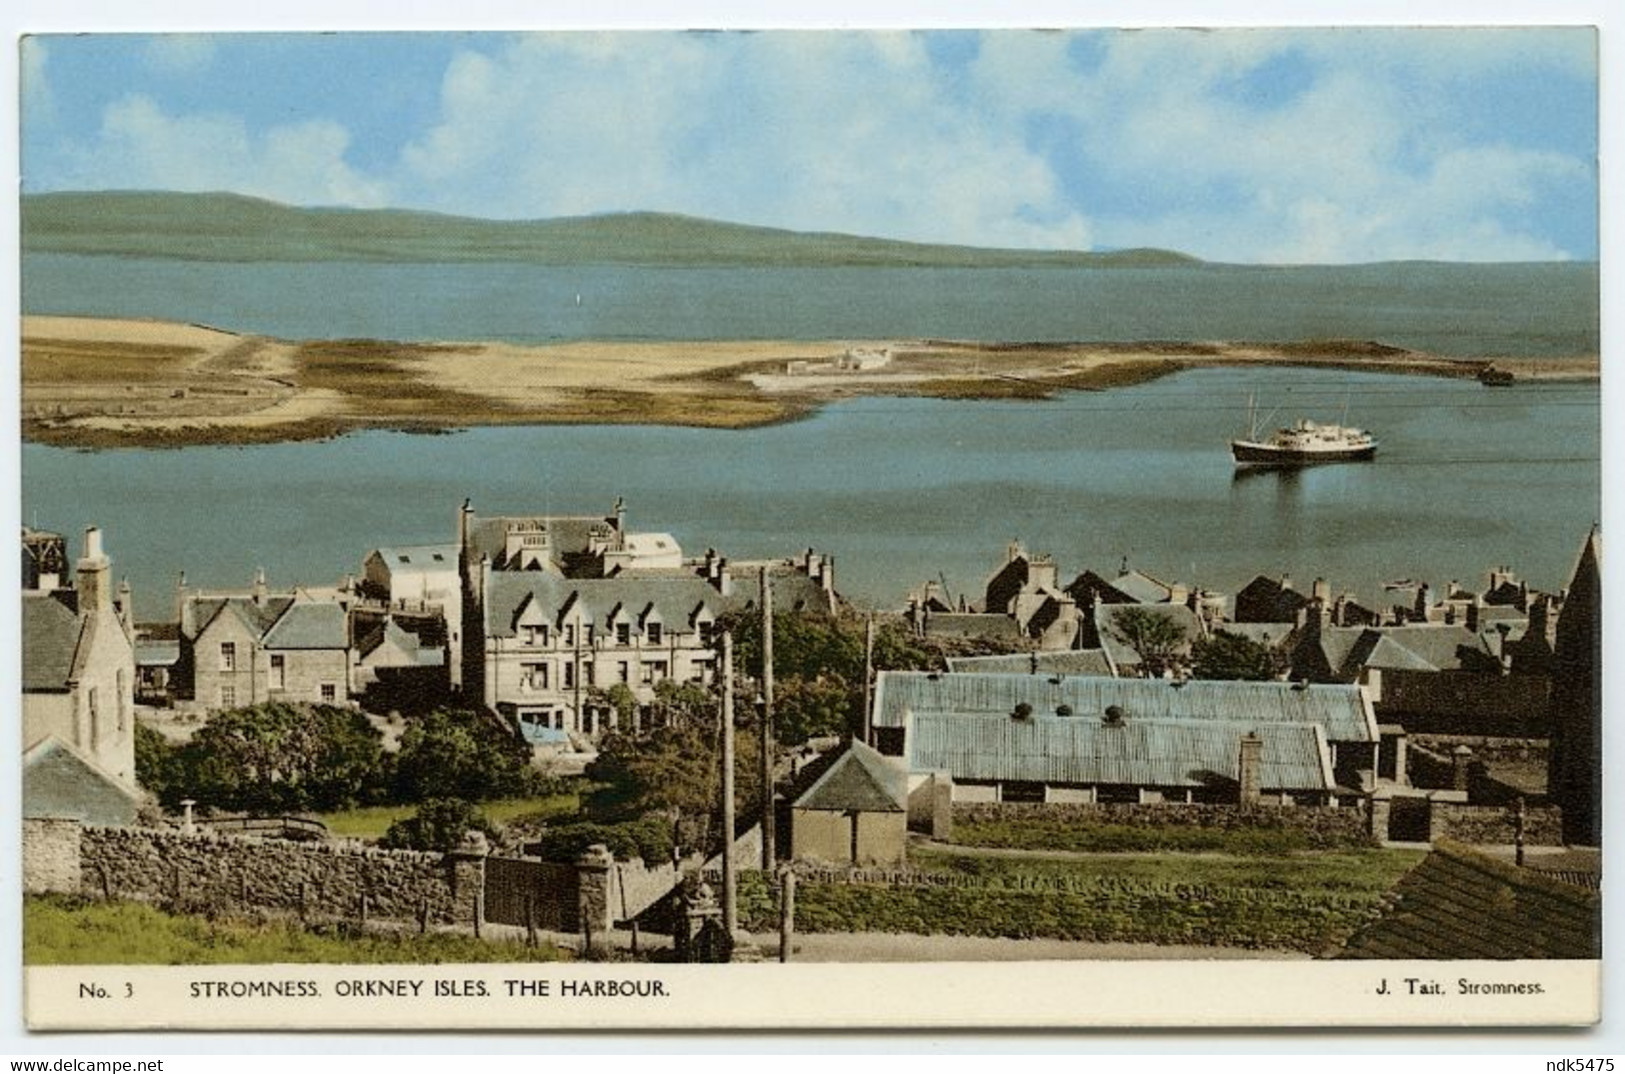 STROMNESS, ORKNEY ISLES, THE HARBOUR - Orkney